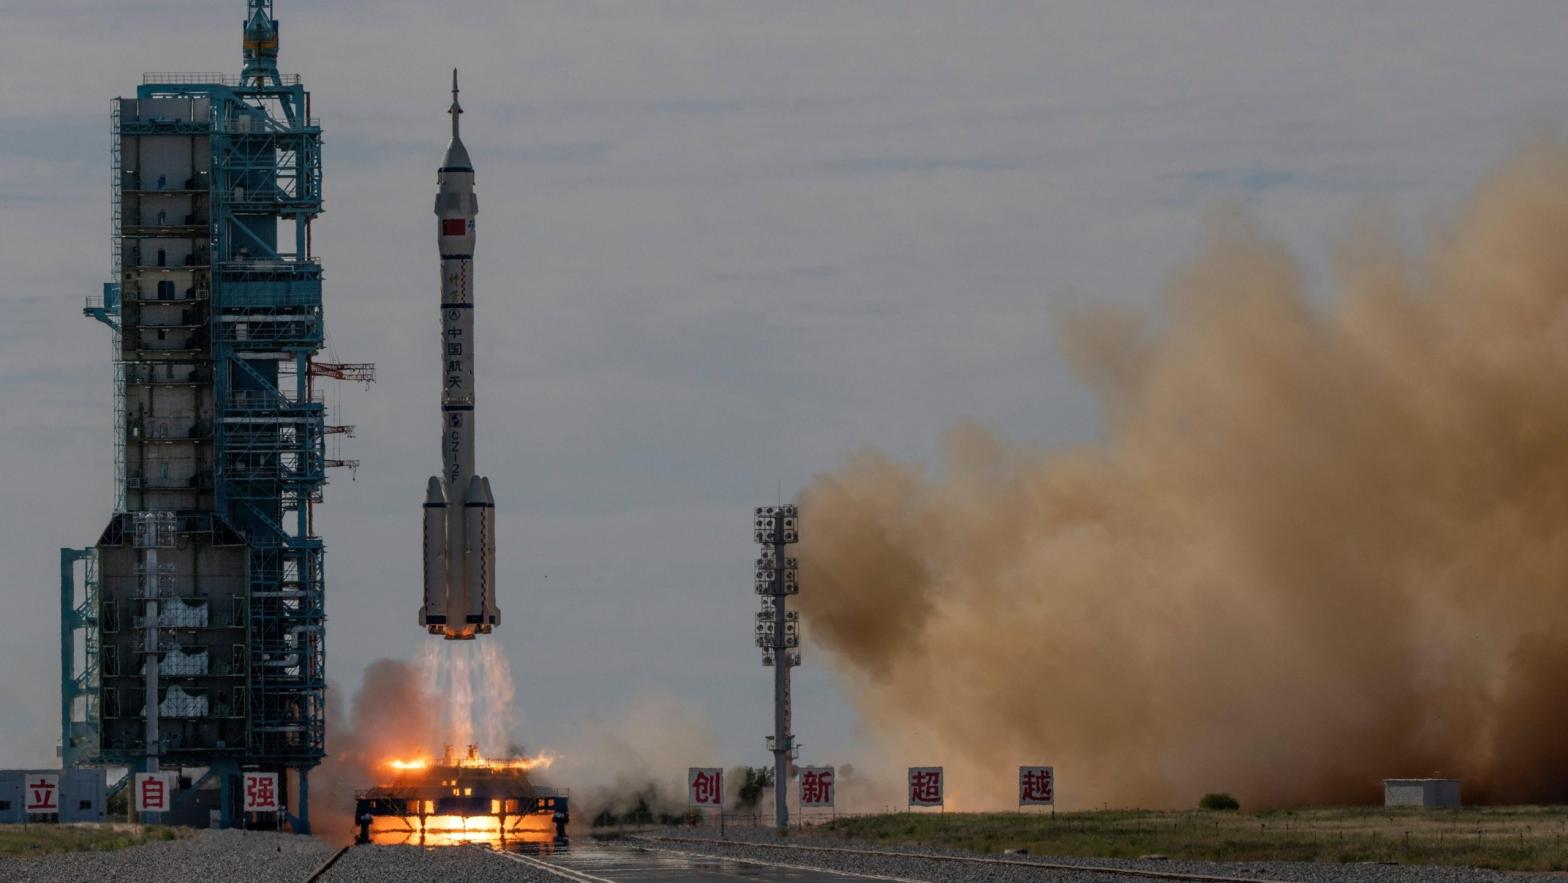 The Shenzhou-12 spacecraft from China's Manned Space Agency onboard the Long March-2F rocket launches with three Chinese astronauts onboard at the Jiuquan Satellite Launch Centre on June 17, 2021 in Jiuquan, Gansu province, China. (Photo: Kevin Frayer, Getty Images)